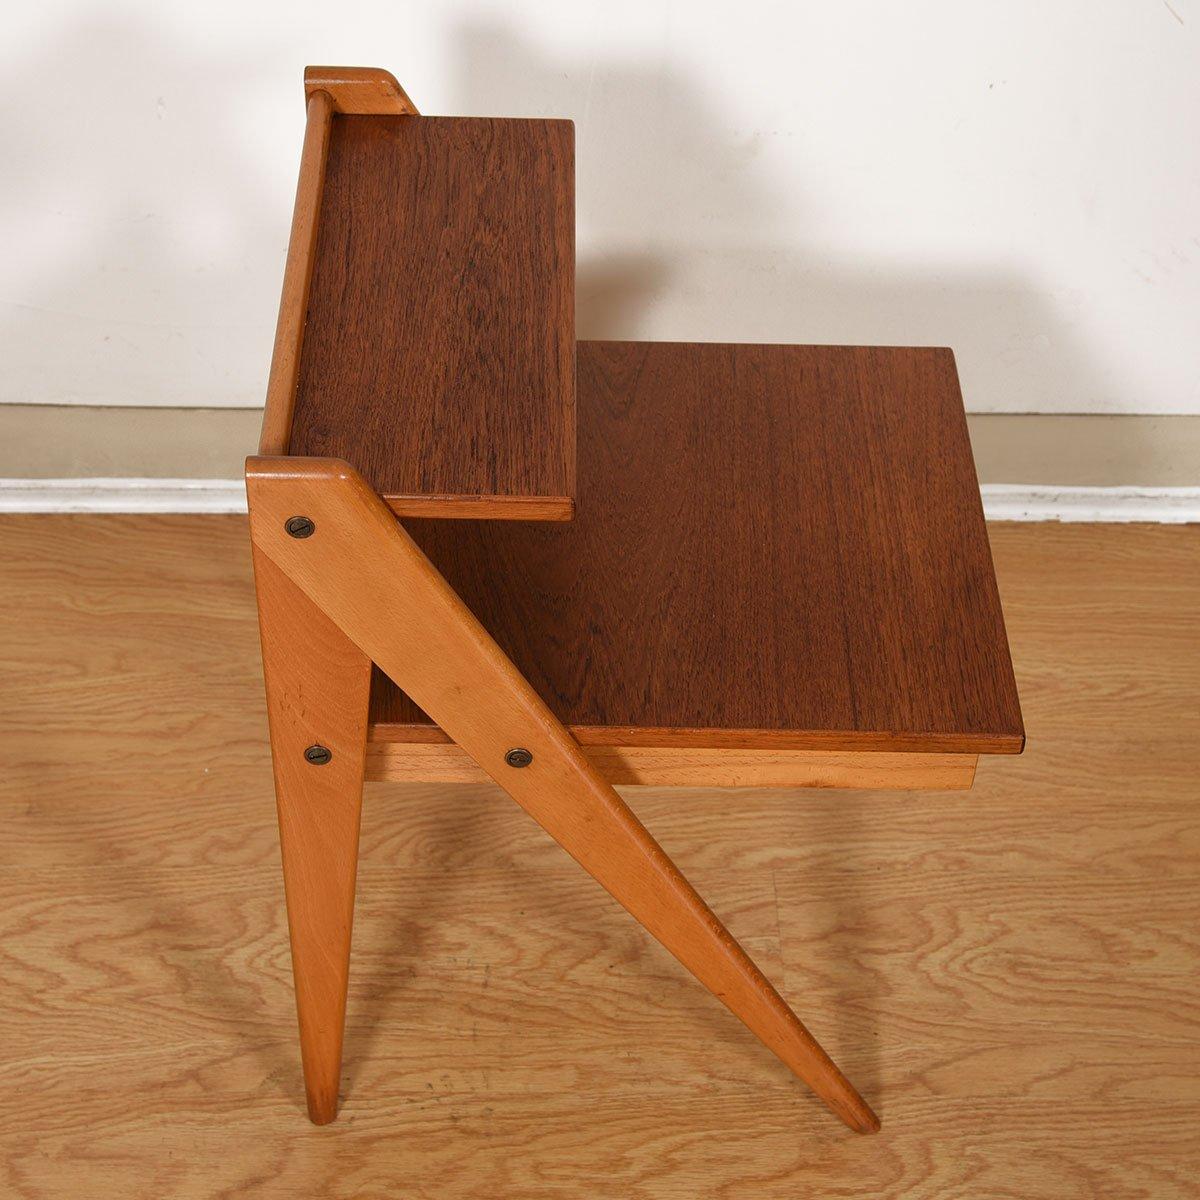 20th Century Swedish Bi-Level End Table with Hairpin Legs